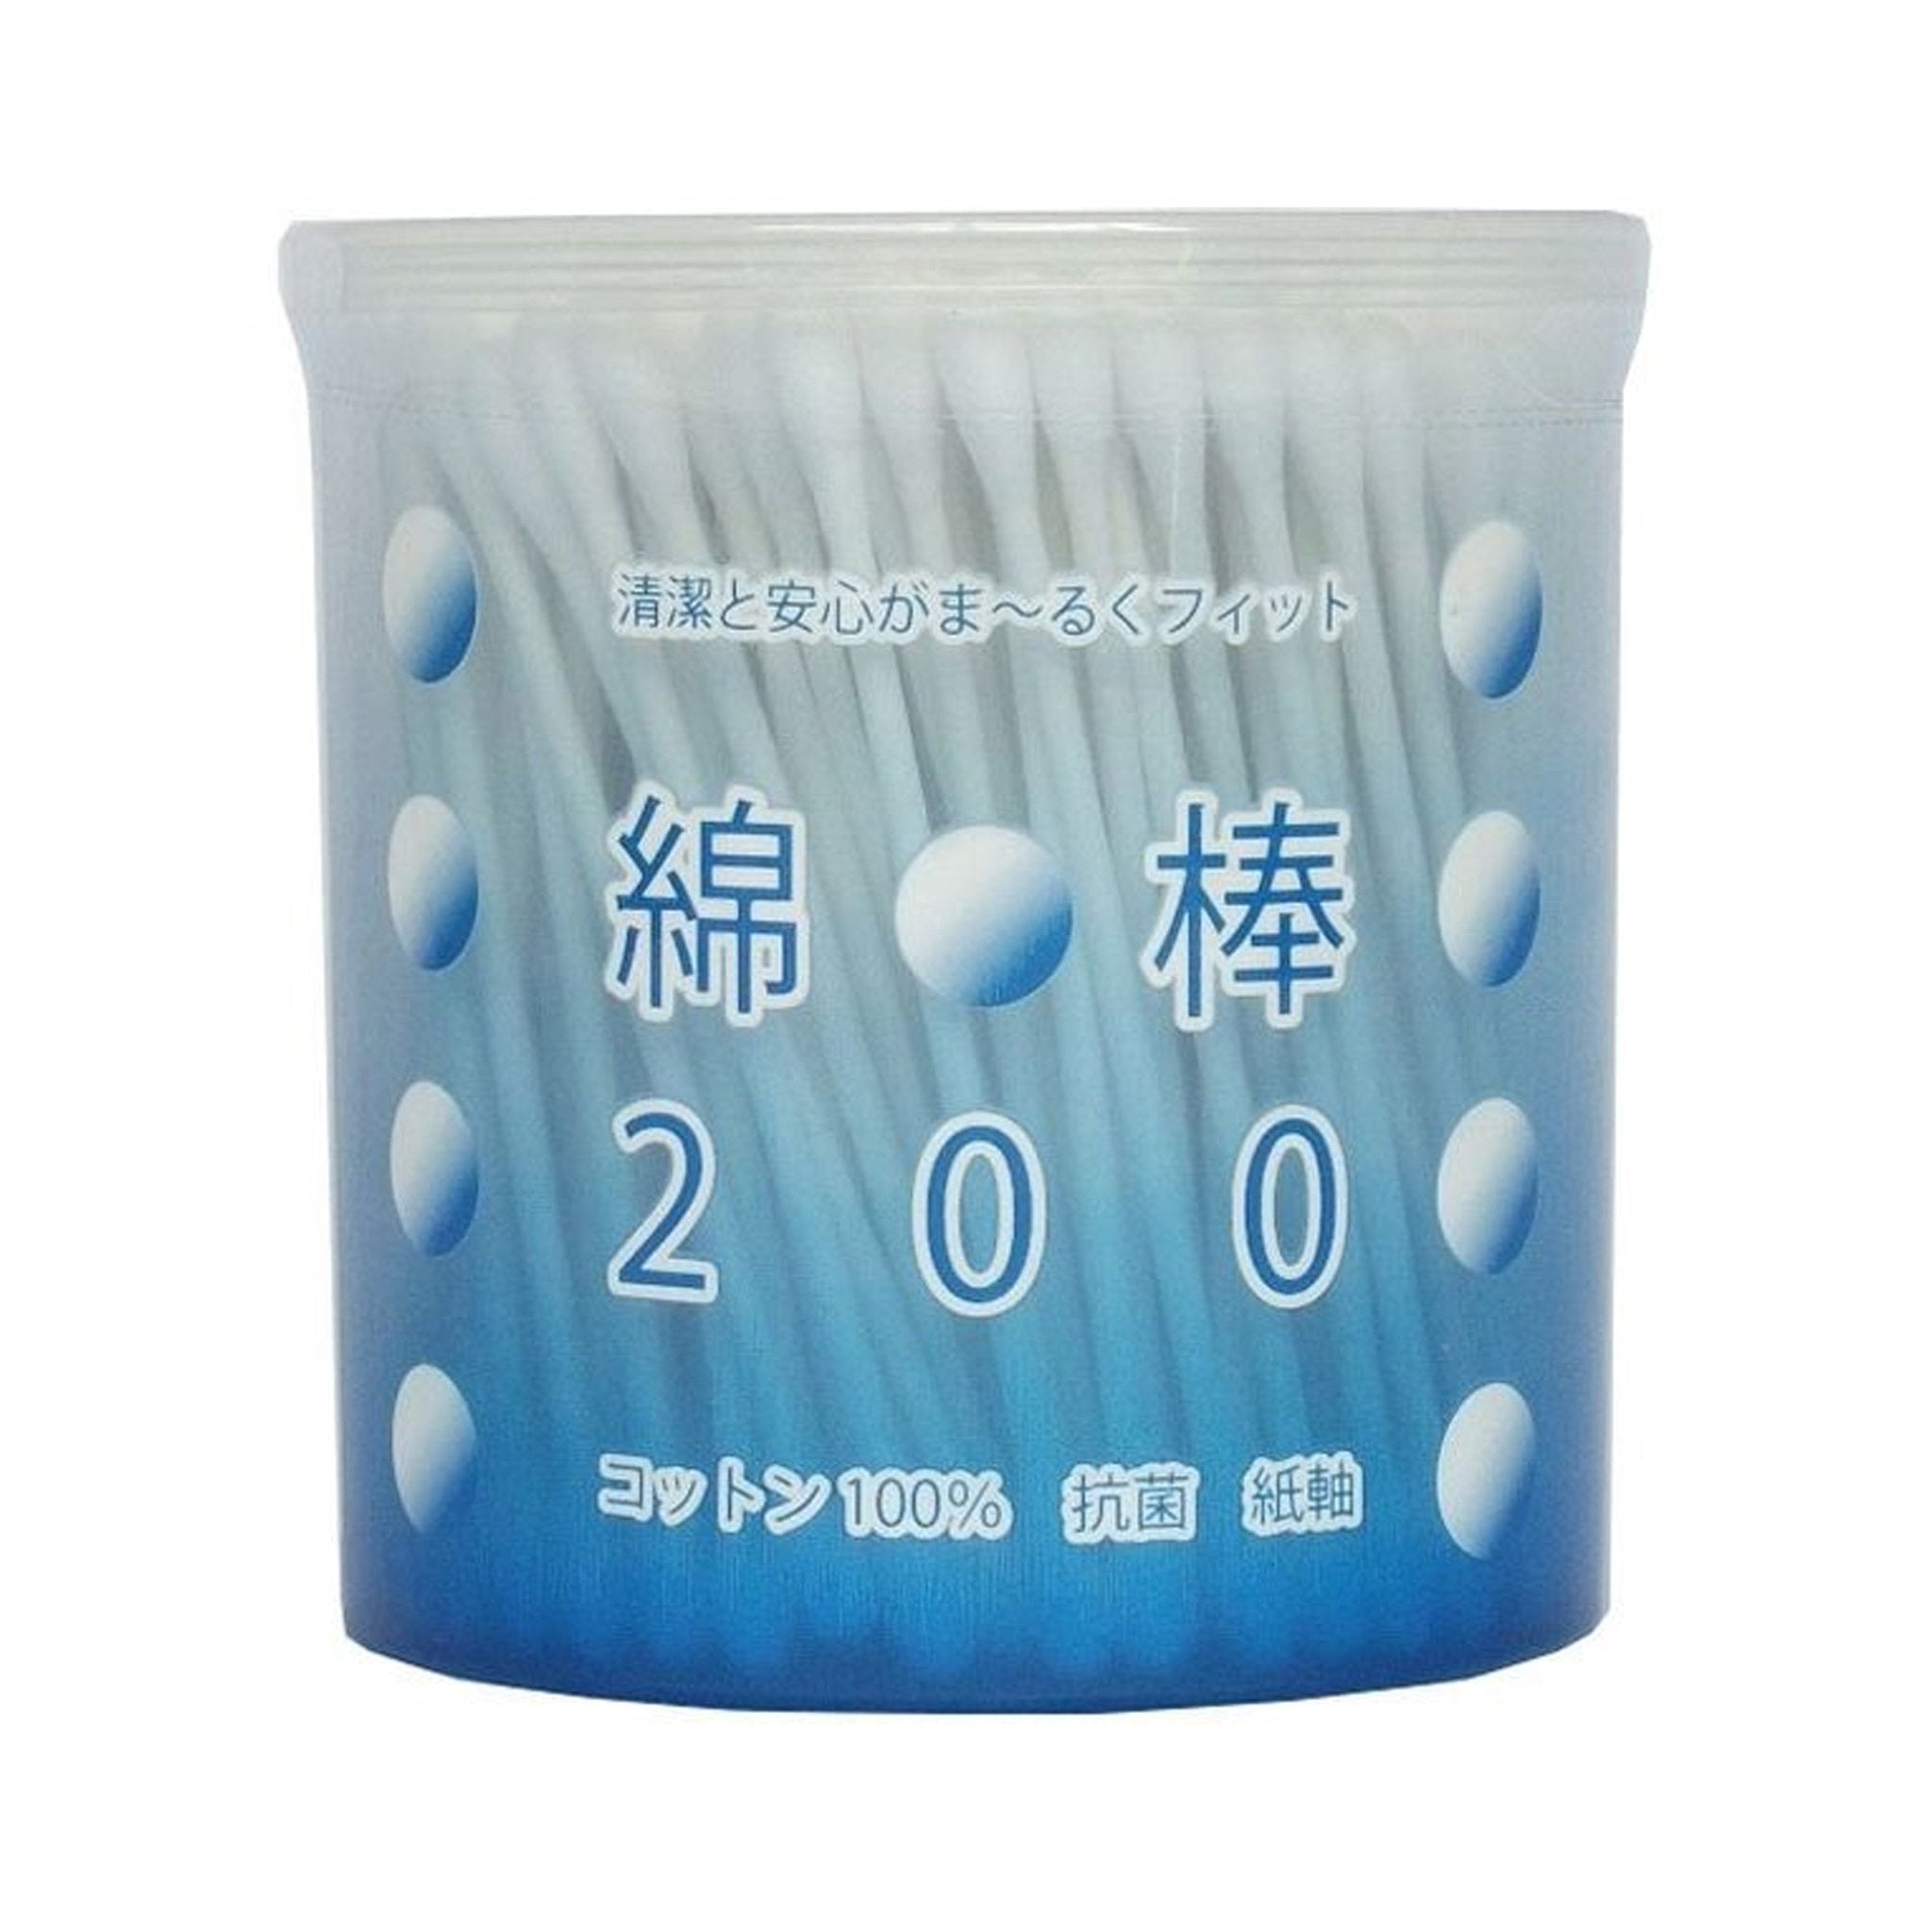 HEIWA MEDIC Cotton Swabs in Cylindrical Case 200Pcs